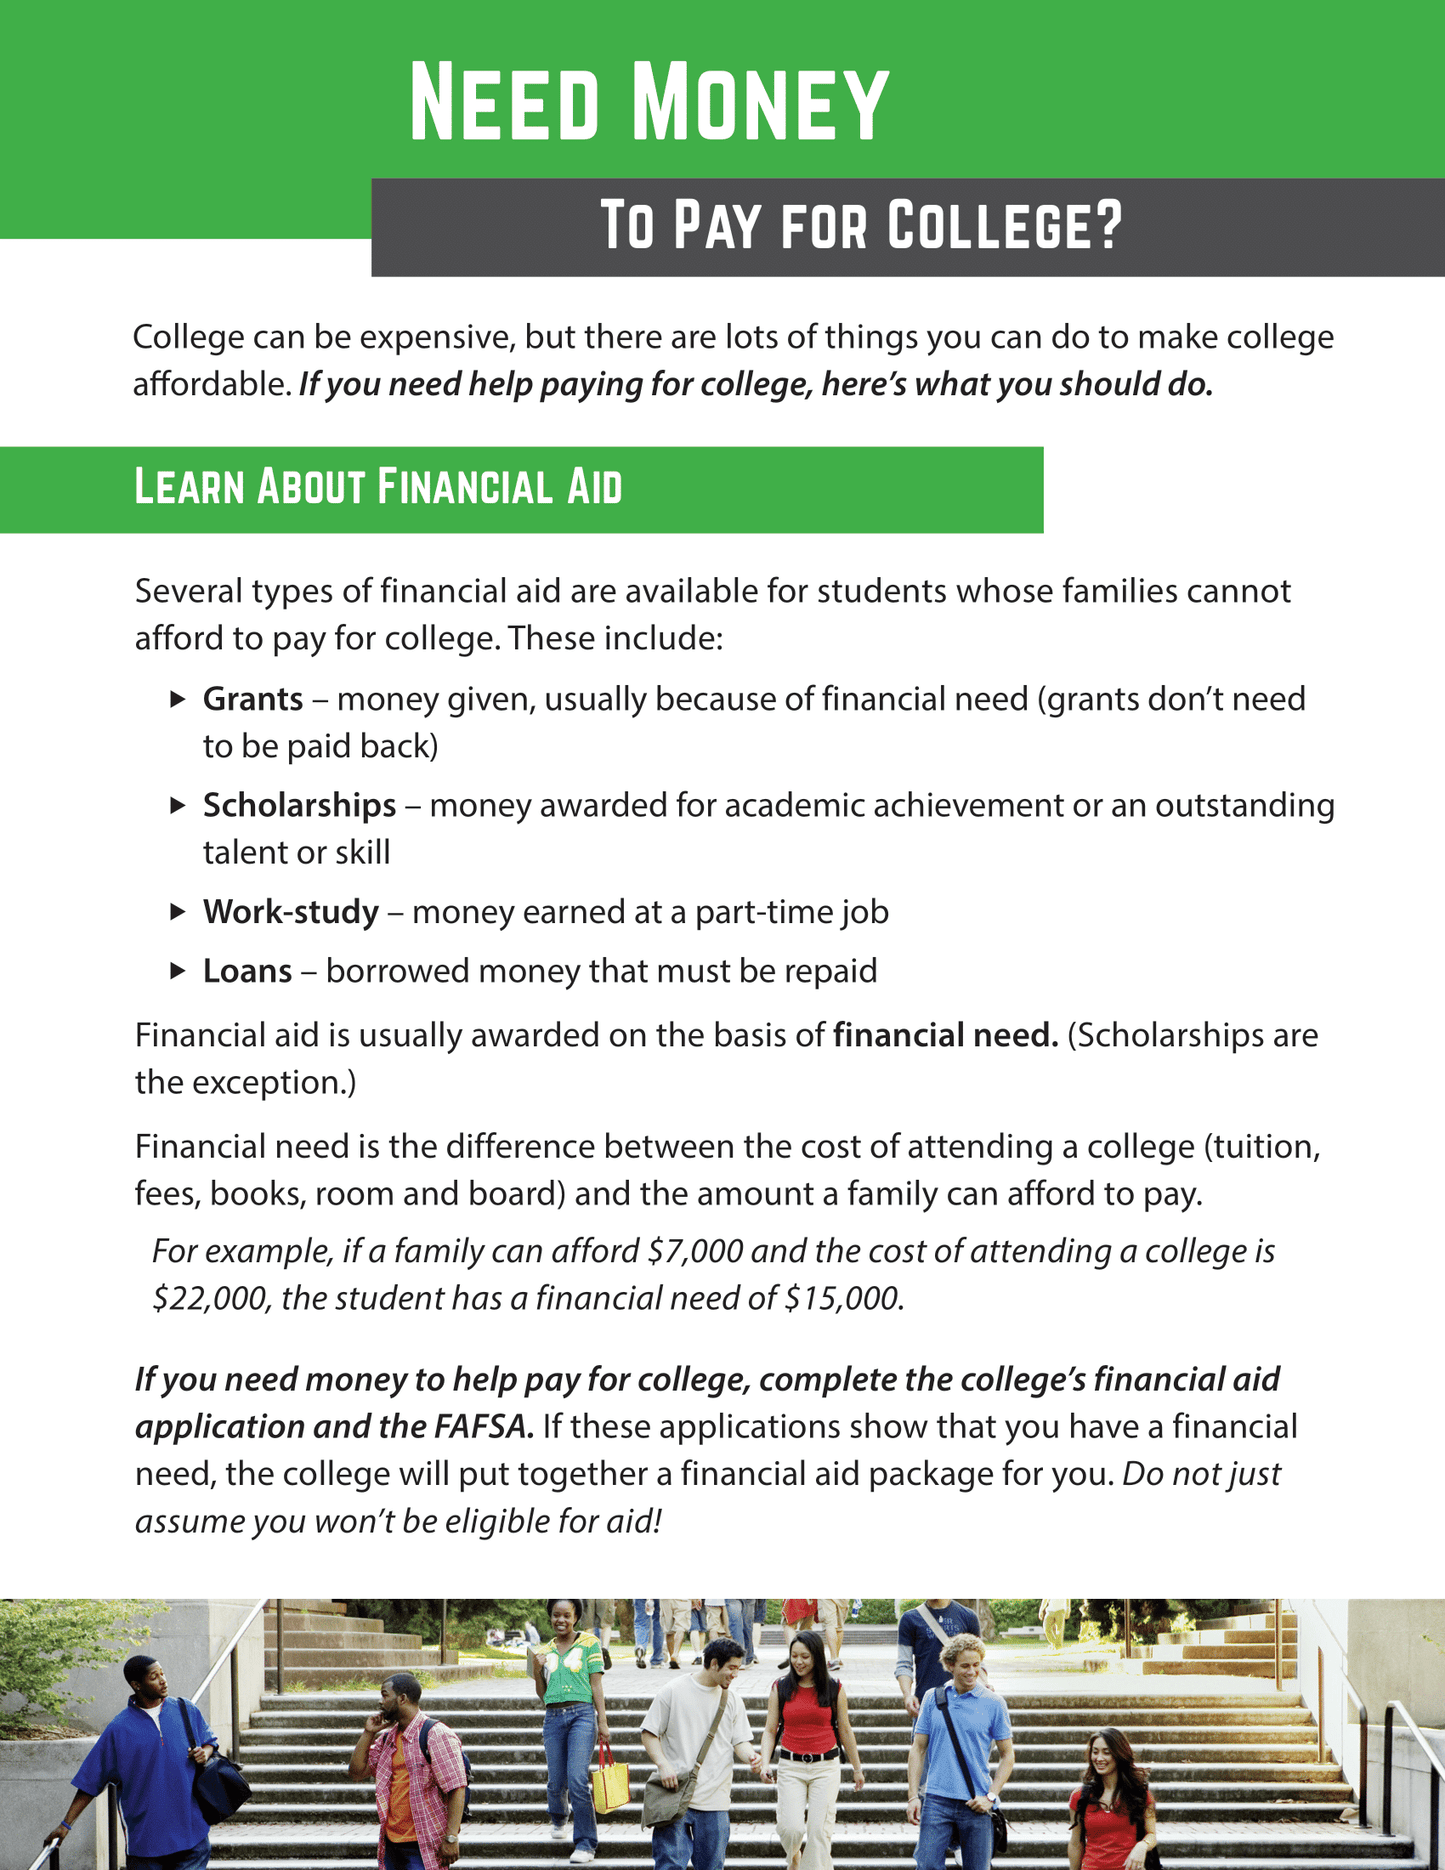 Need Money to Pay for College?